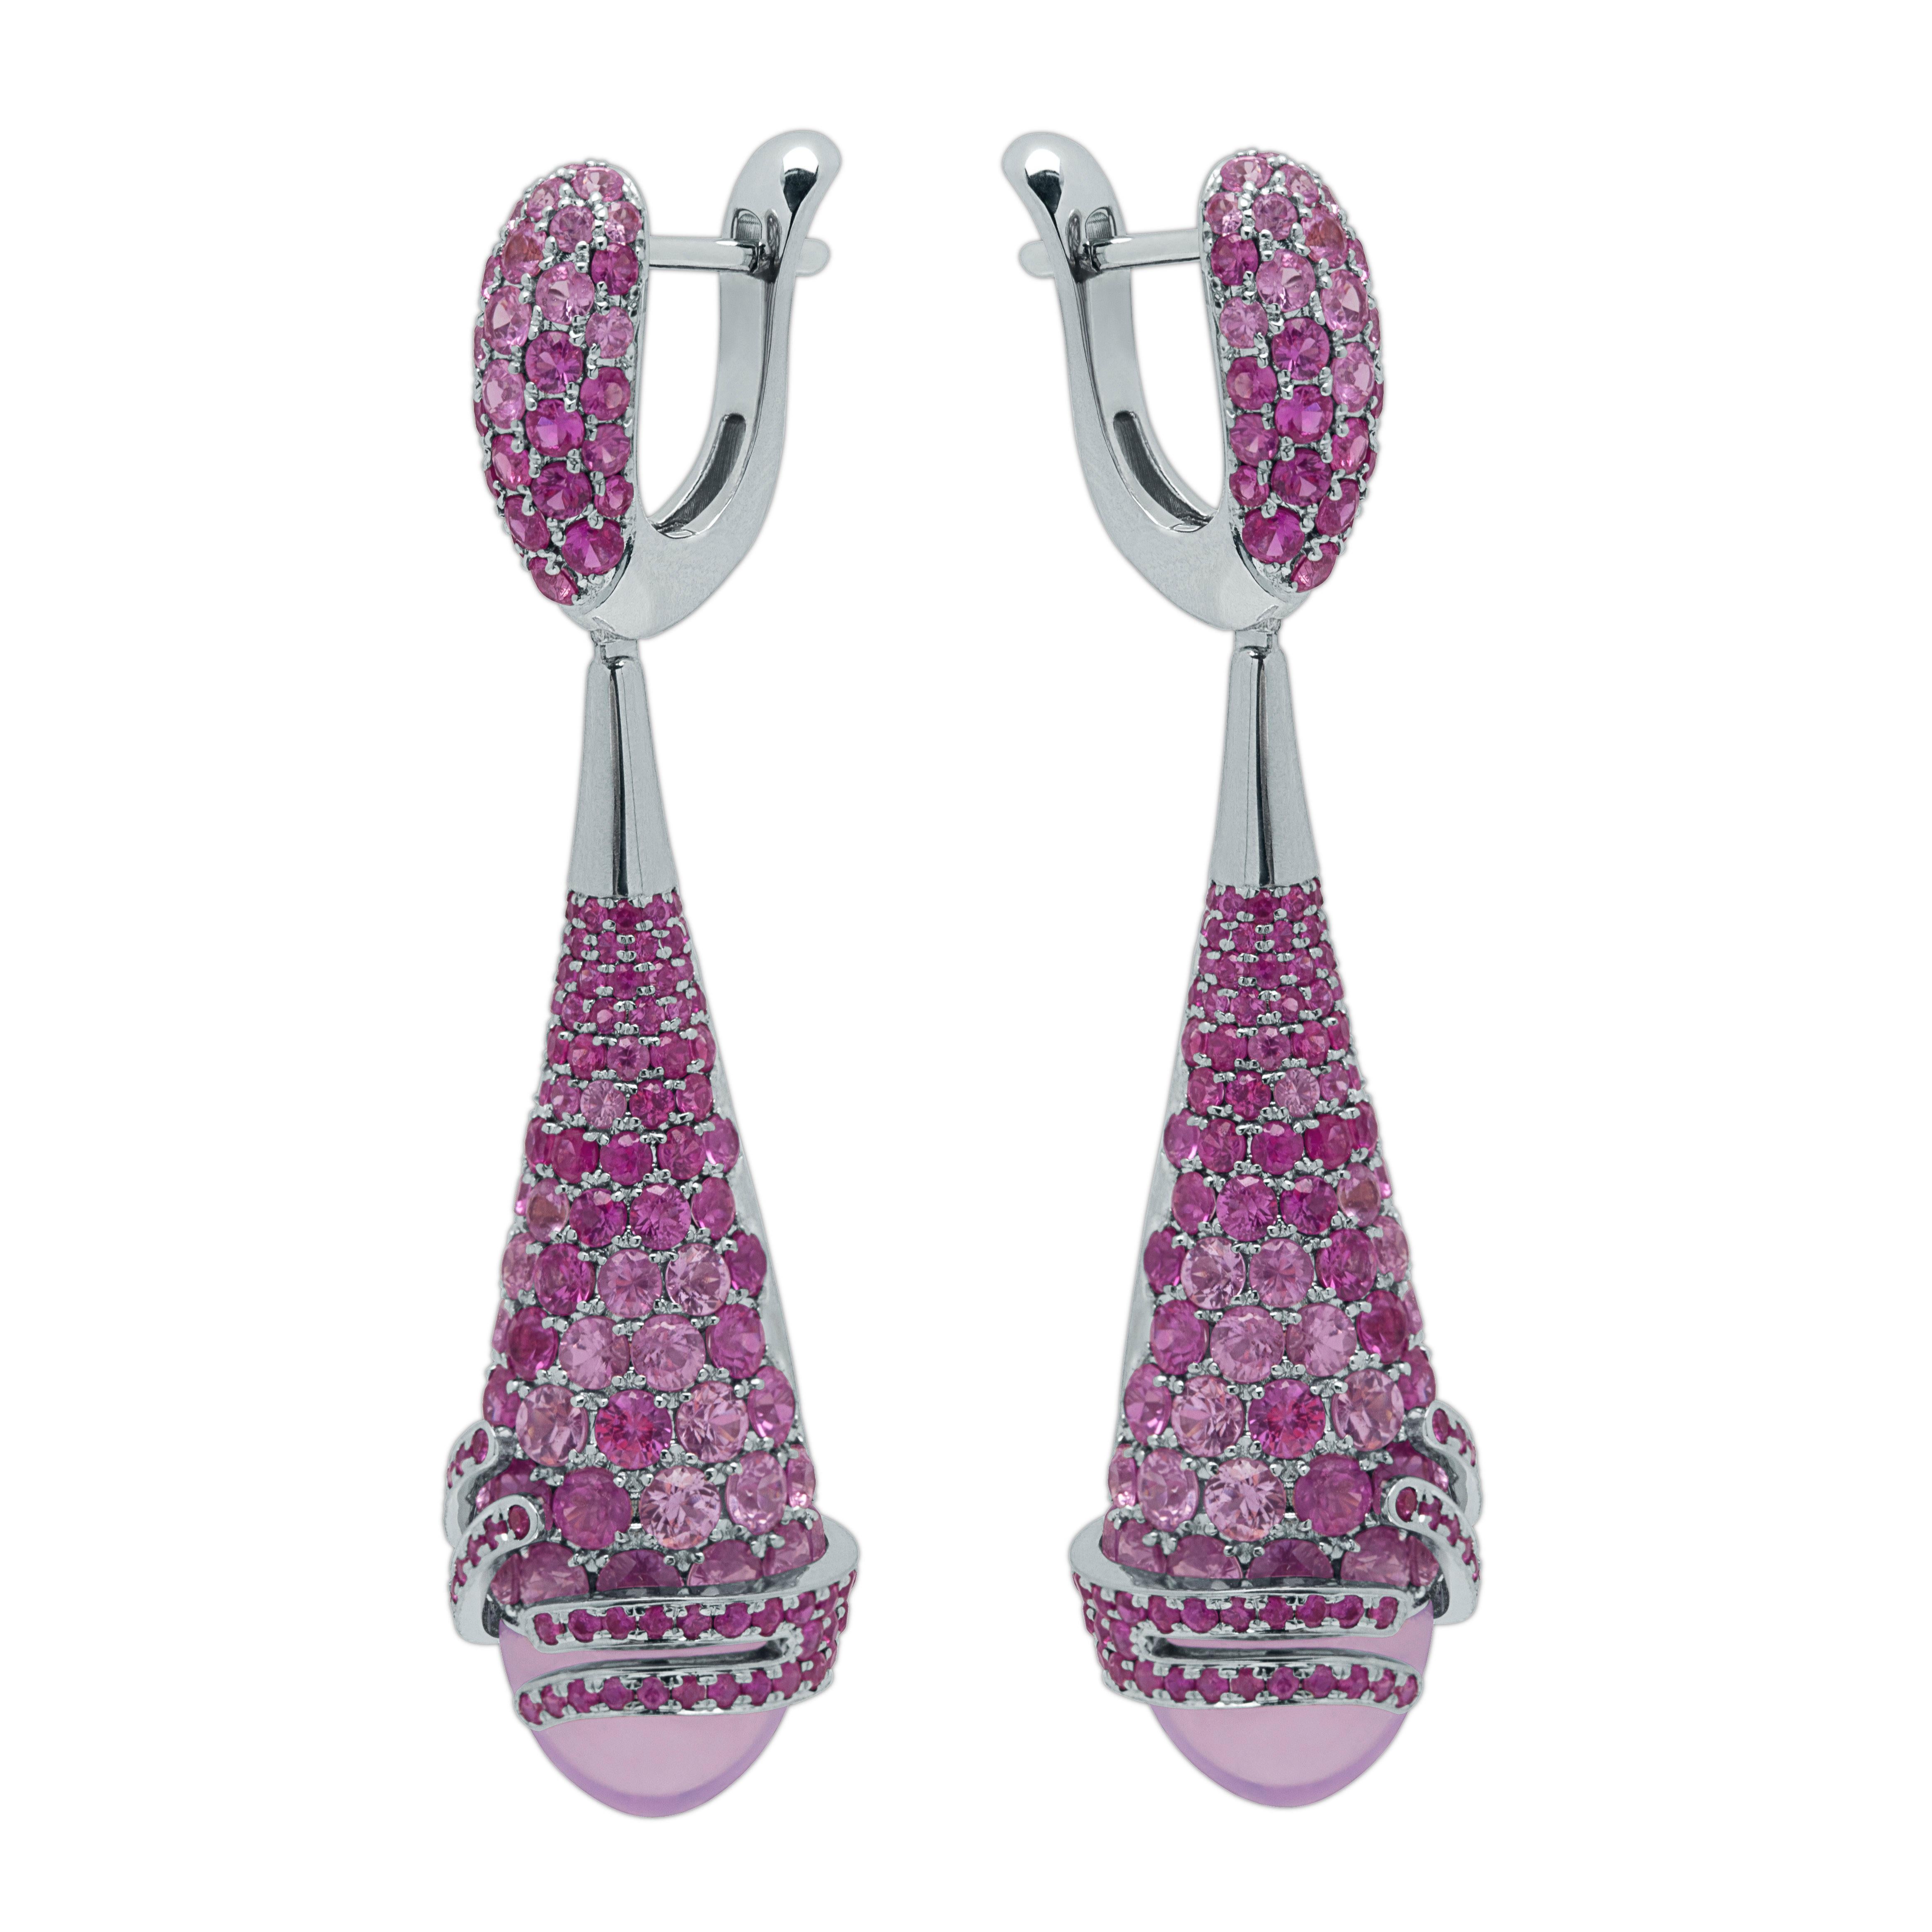 Lavender Quartz 8.87 Carat Pink Sapphires 18 Karat White Gold Fuji Earrings
Series of these Earrings isn't called Fuji for nothing, since the inspiration for the creation of these products came to us exactly from the contemplation of this majestic